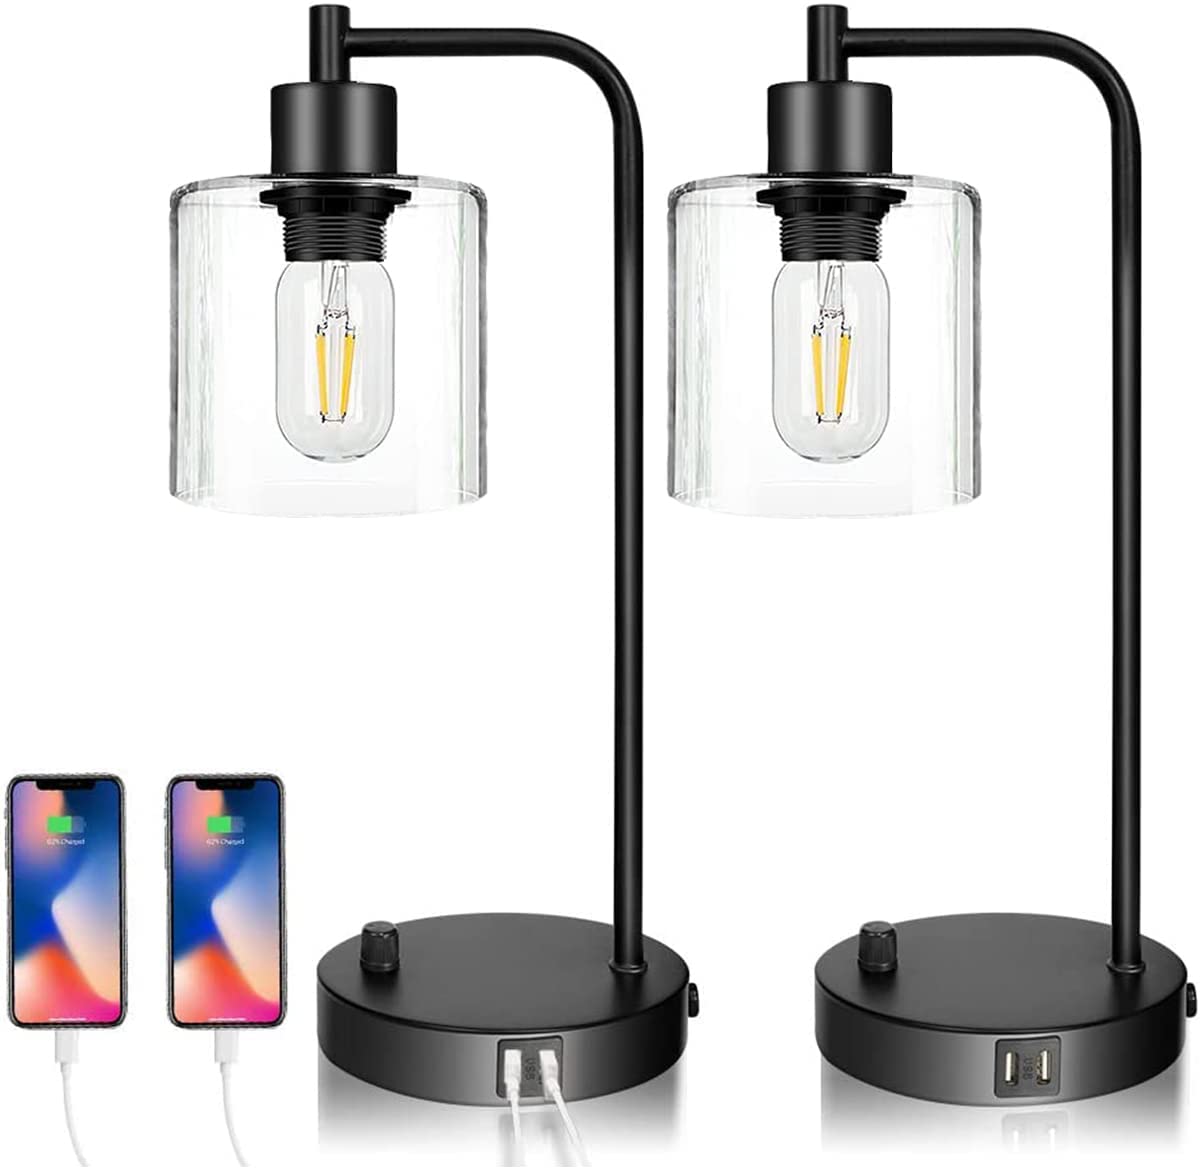 Back in Stock! Free Shipping on this set of Two Industrial Dimmable Table Lamps with 2 USB Ports and Energy Efficient LED Bulbs